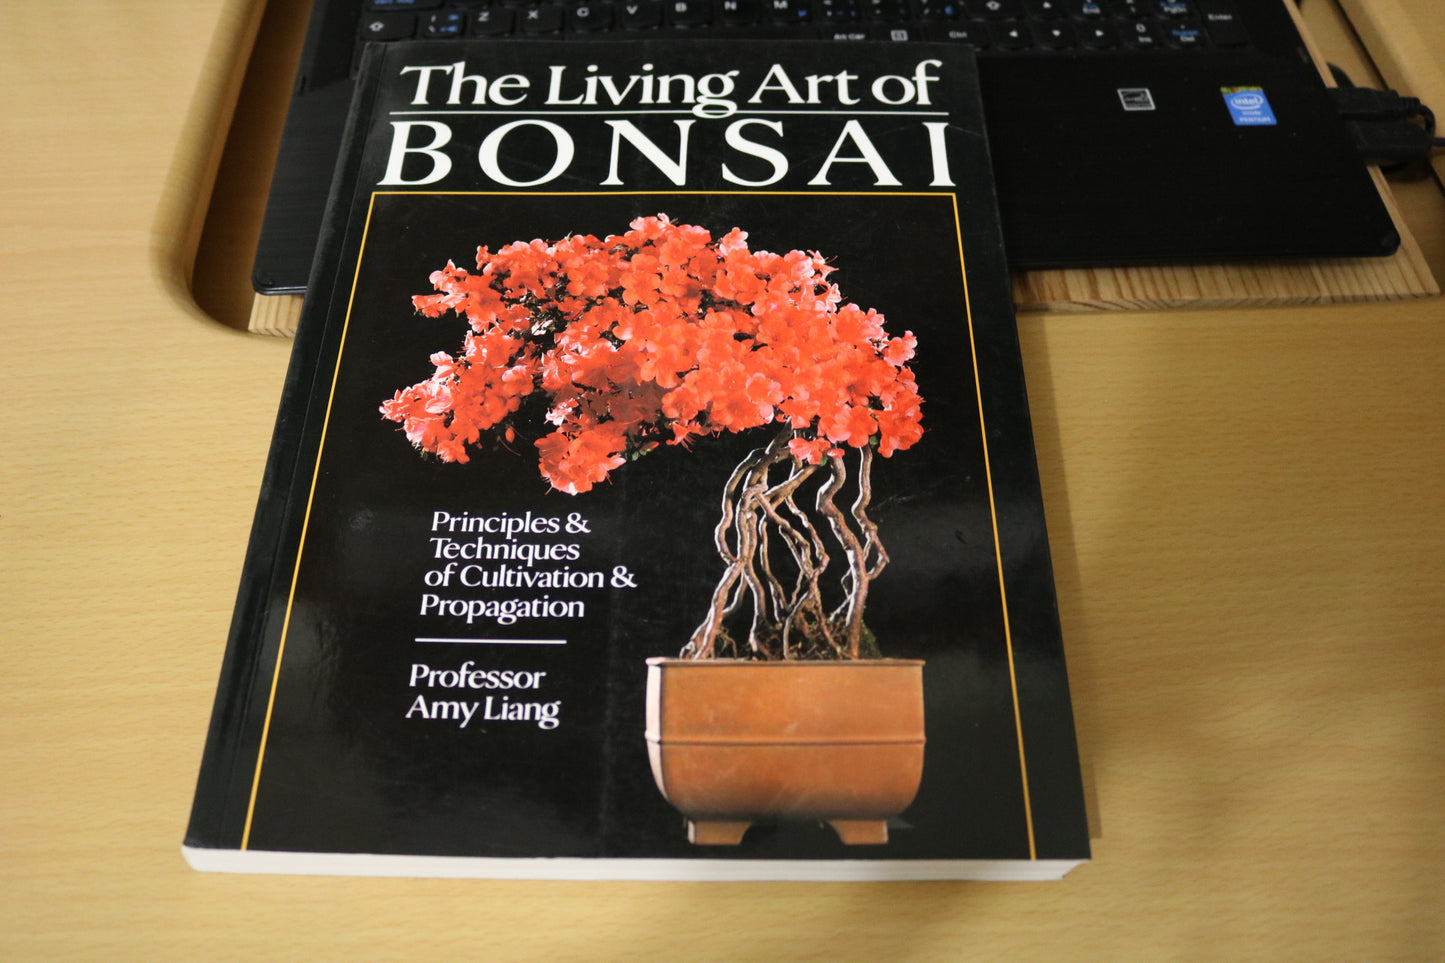 The Living Art of Bonsai by Amy Liang